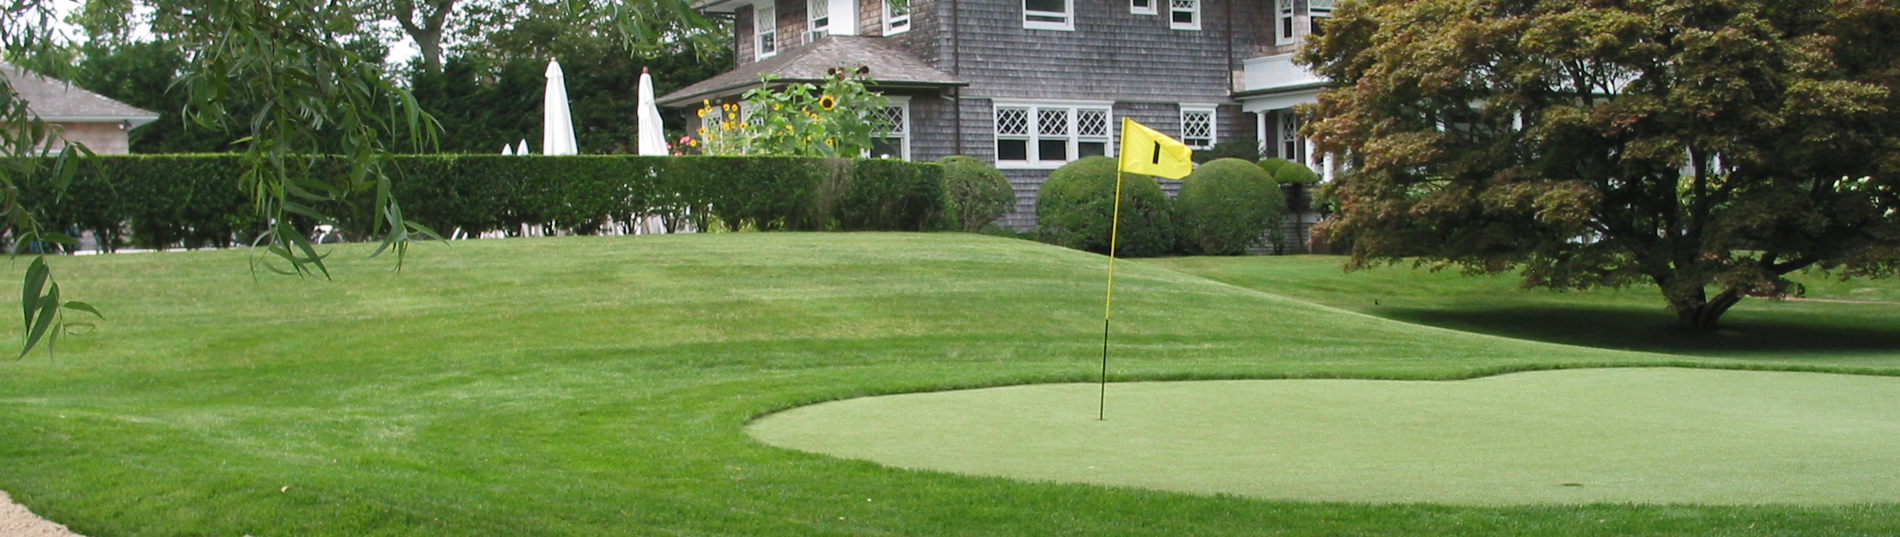 Backyard Golf Greens Home Putting Greens In Ny Nj Ct Personal Putting Greens